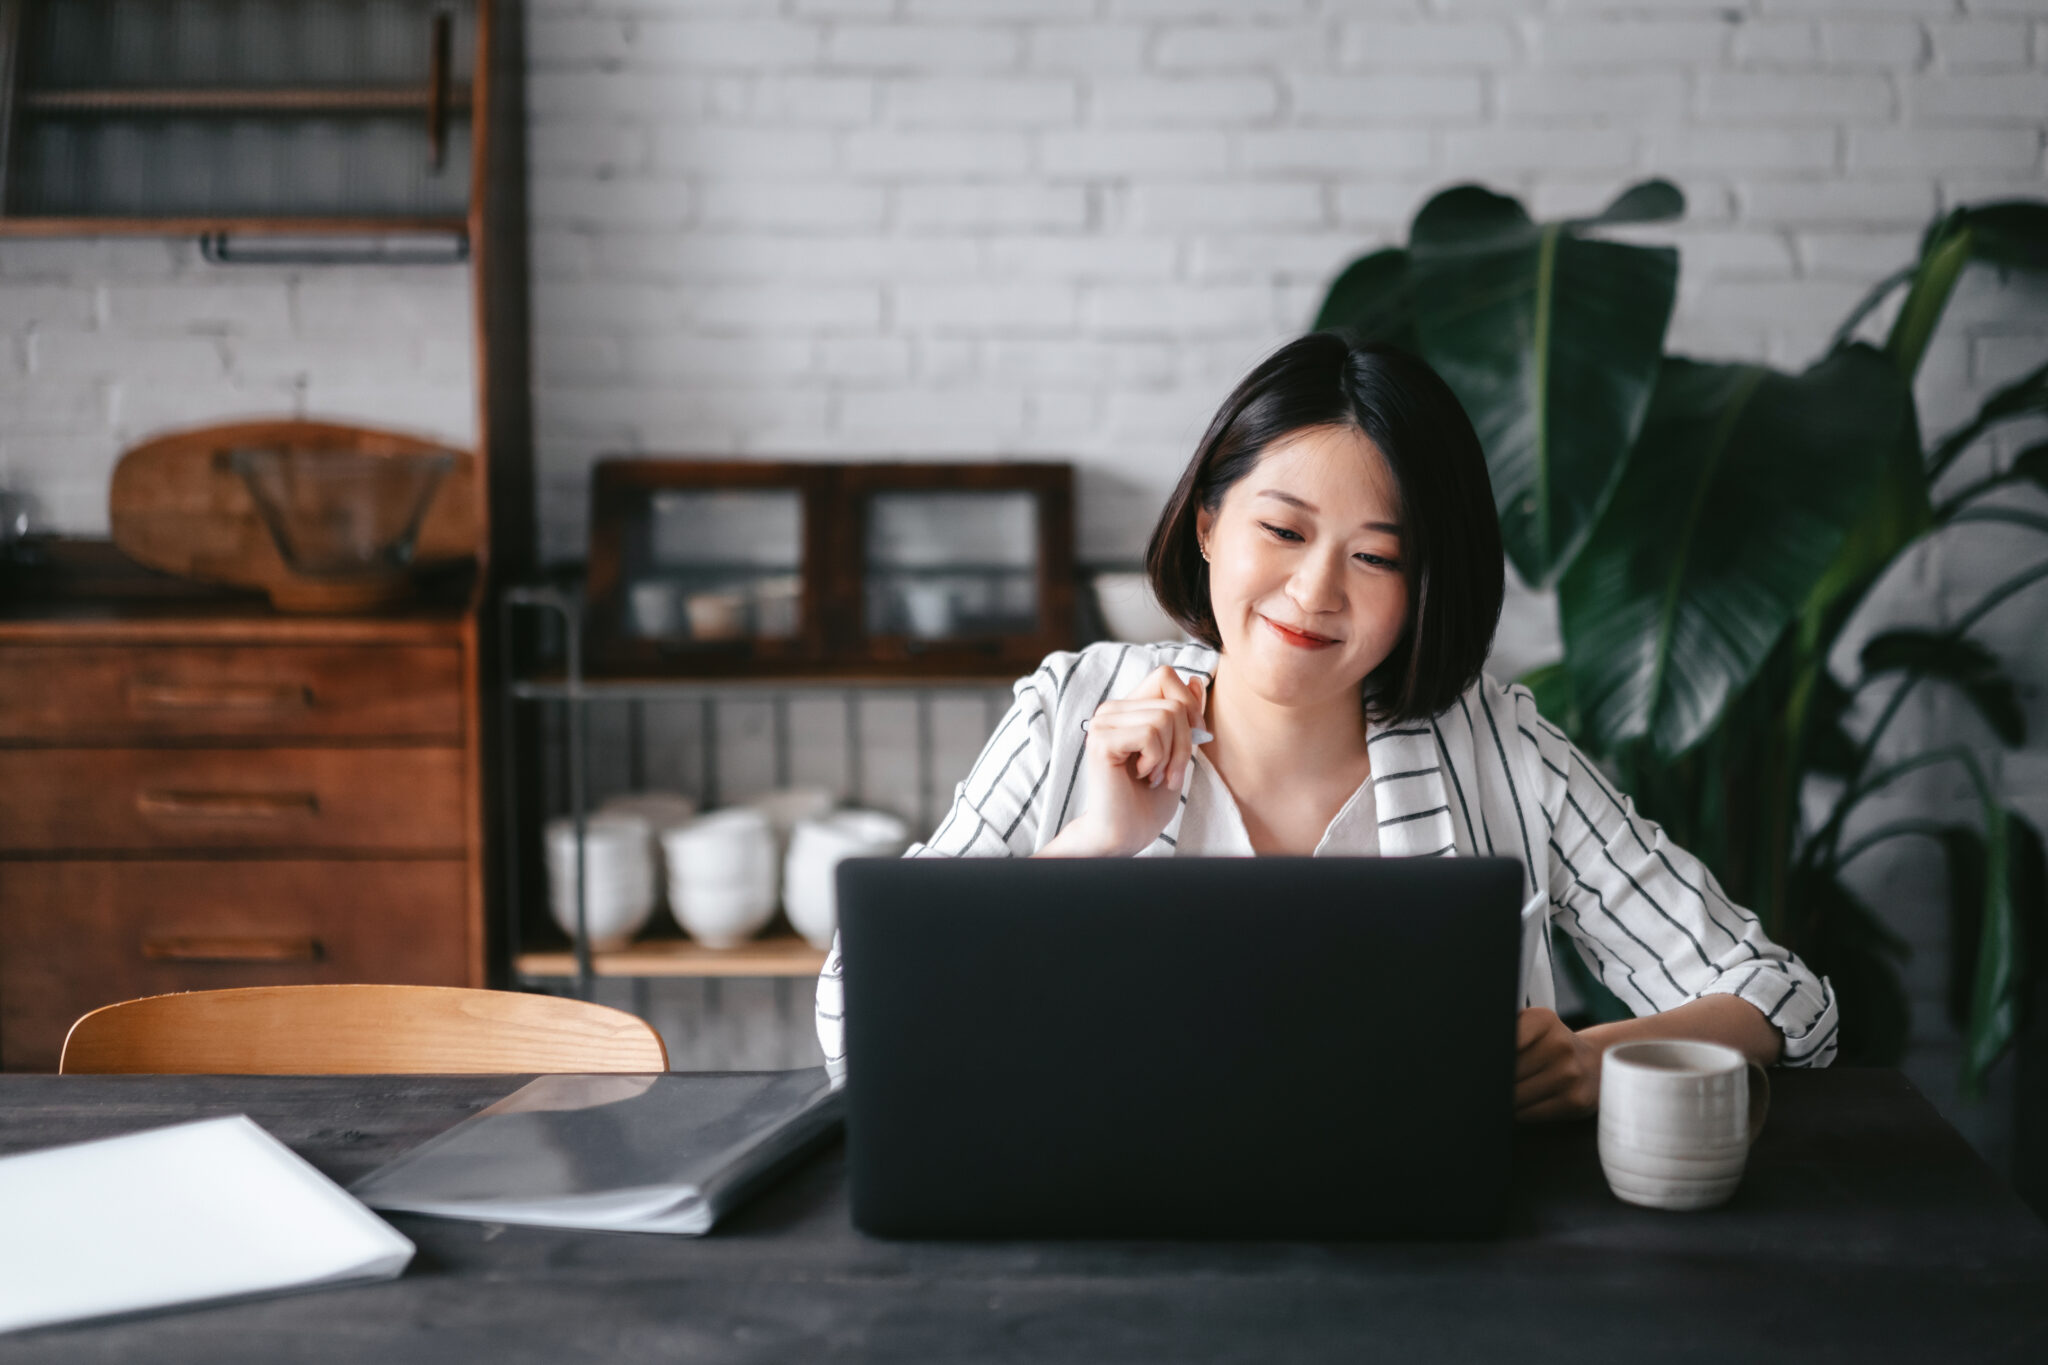 Asian feminine-presenting person sitting at a table in front of their laptop and a coffee mug with a white brick wall, wood cabinets, and a large plant in the background